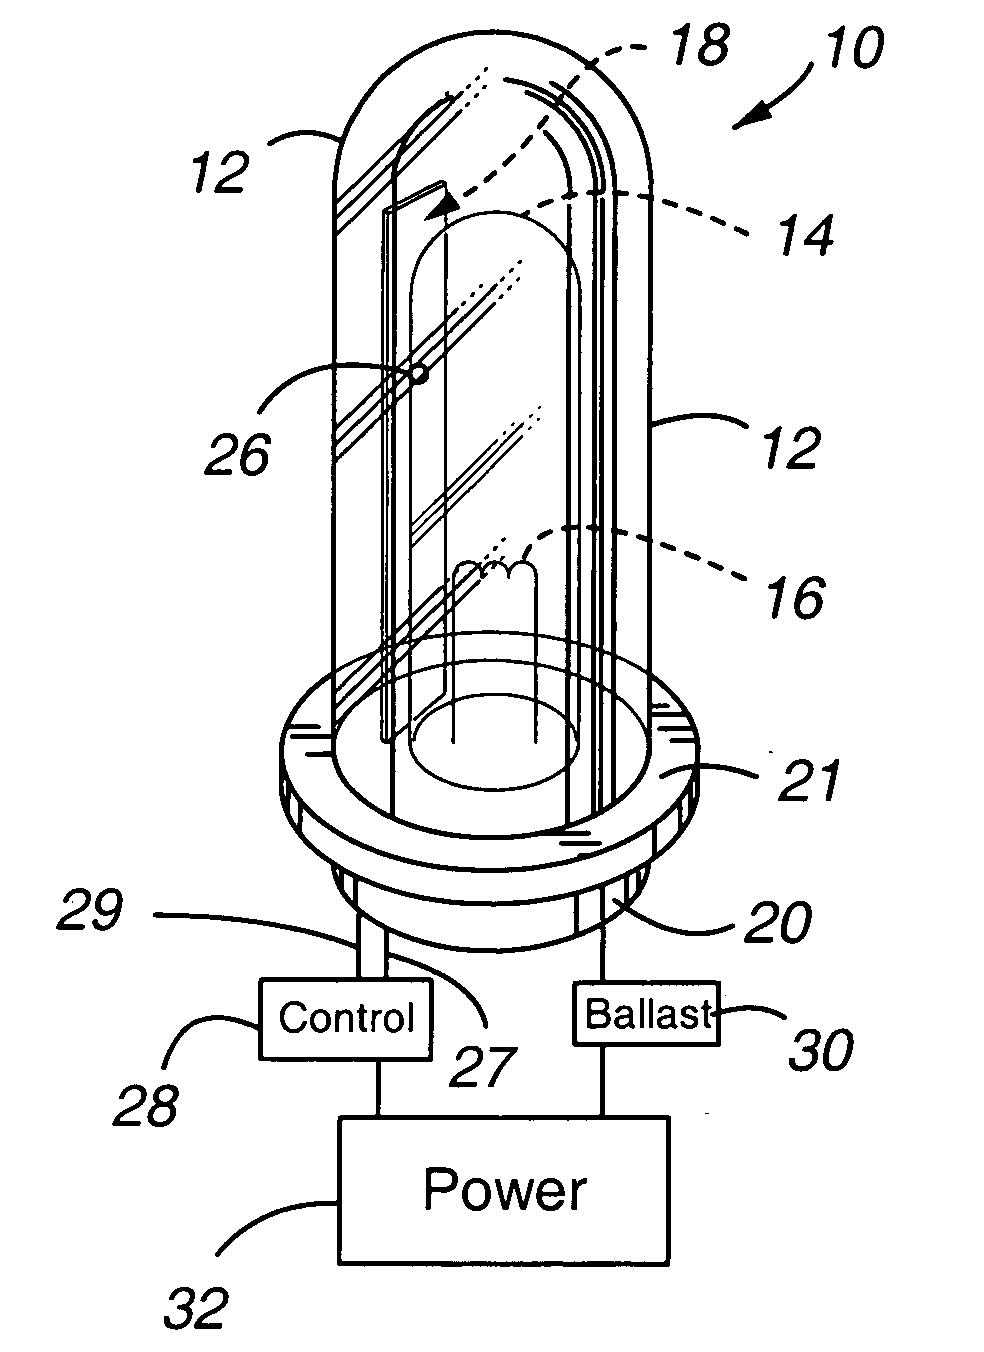 Heat controlled ultraviolet light apparatus and methods of sanitizing objects using said apparatus